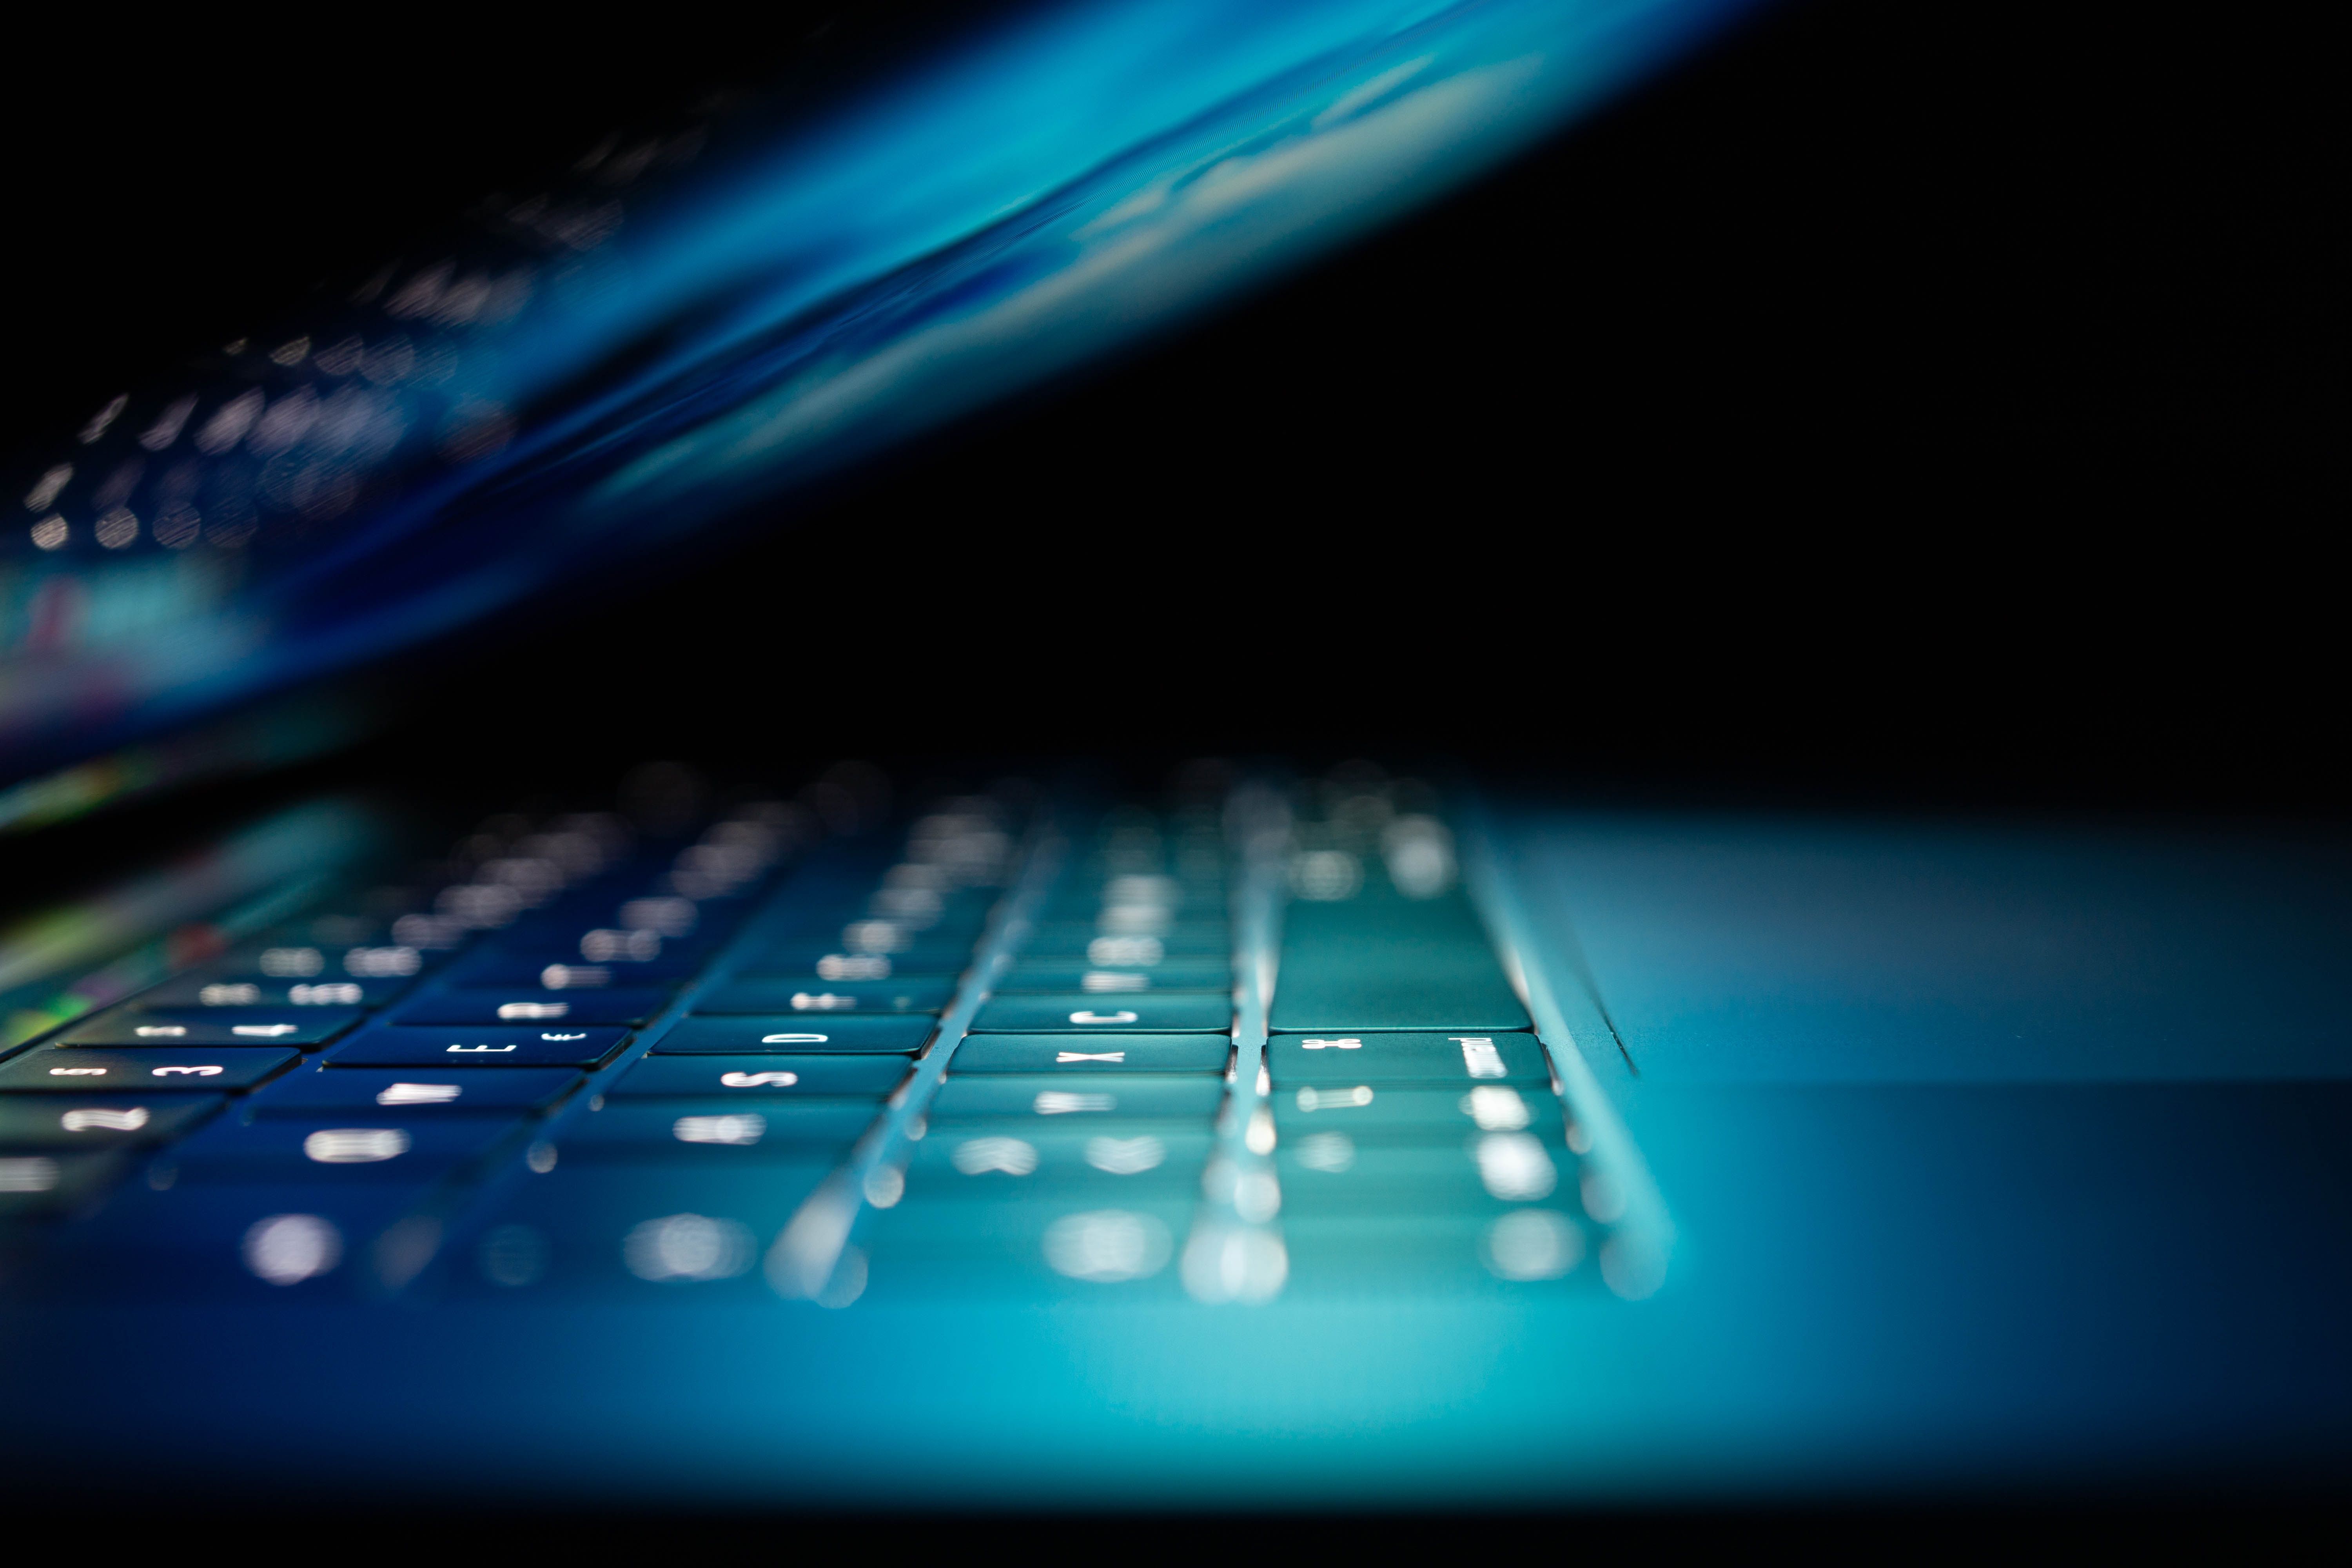 Image is of a laptop opened slightly, blue light glowing across the keyboard and touchpad.